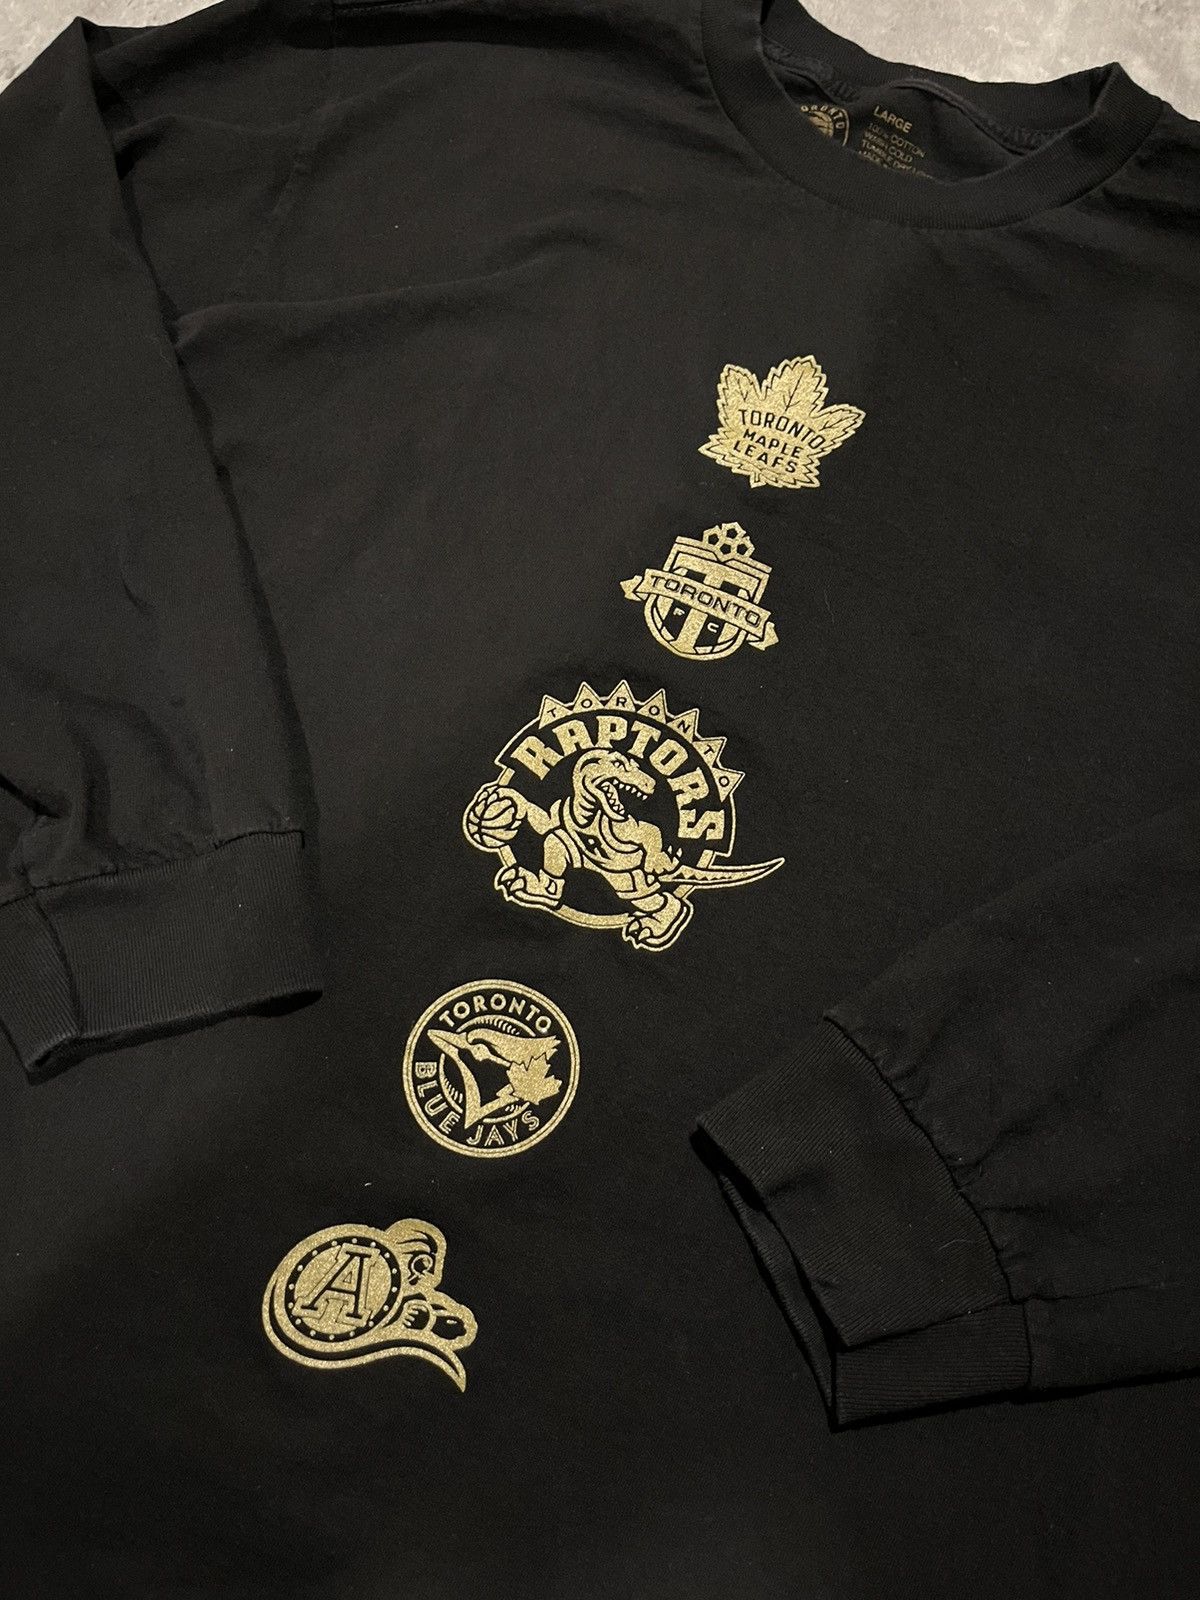 Octobers Very Own OVO x Toronto Raptors Drake Night 2018 Long Sleeve Tee Size US L / EU 52-54 / 3 - 2 Preview